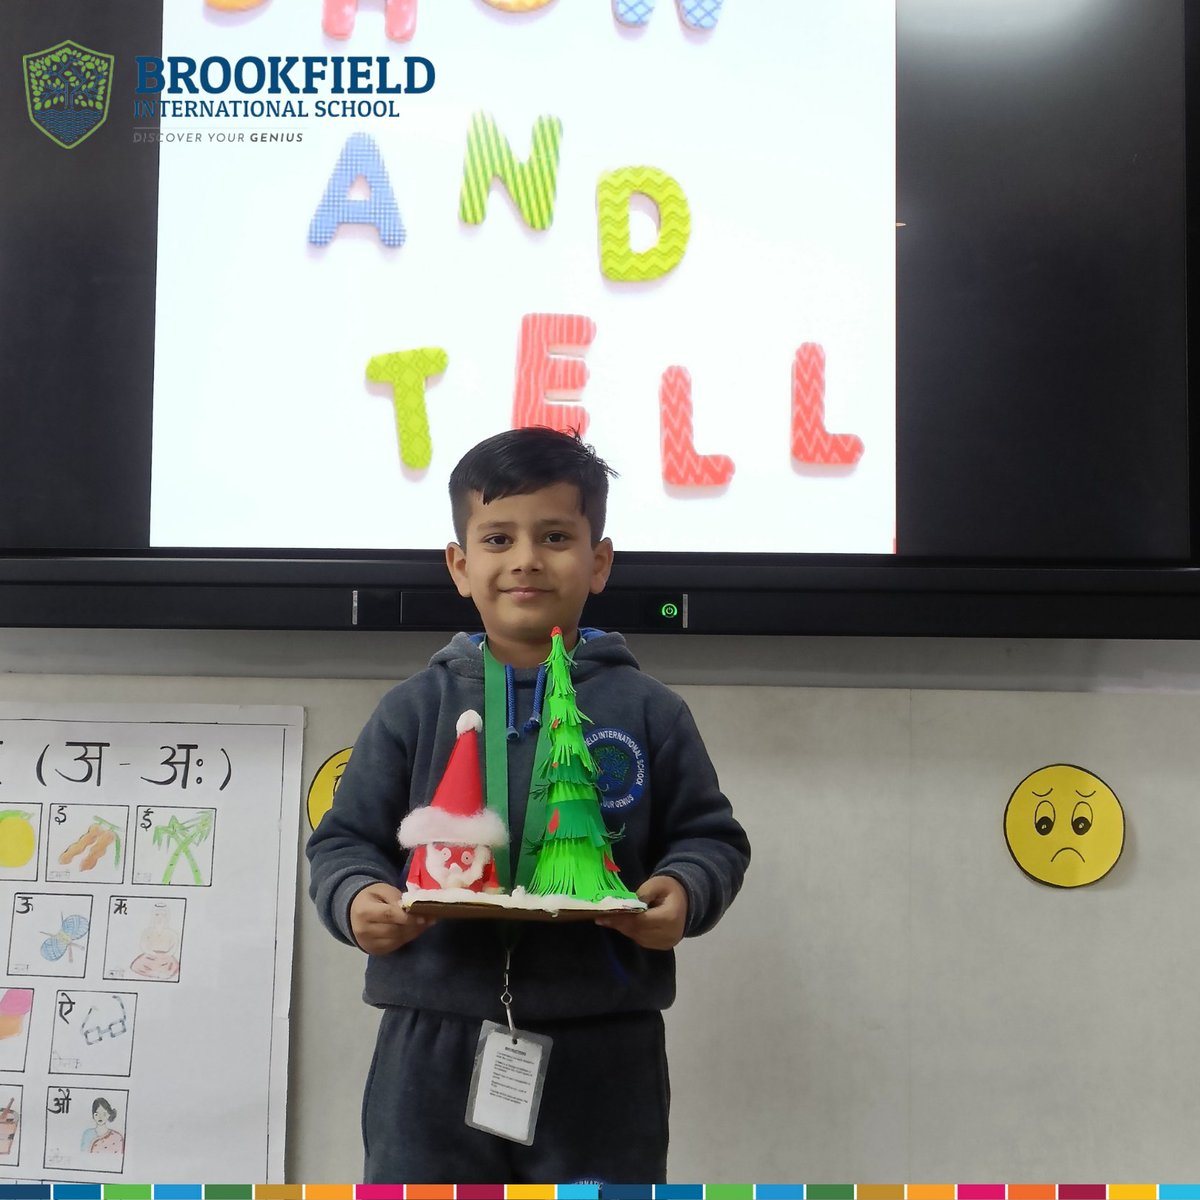 📷Today's show and tell at BFIS was a festive delight! The classroom was filled with holiday spirit as kids eagerly showcased bells, candy canes, Christmas trees, and gifts, sharing the joy of the season with their classmates. 📷 #BrookfieldInternationalSchool #bestschoolintown